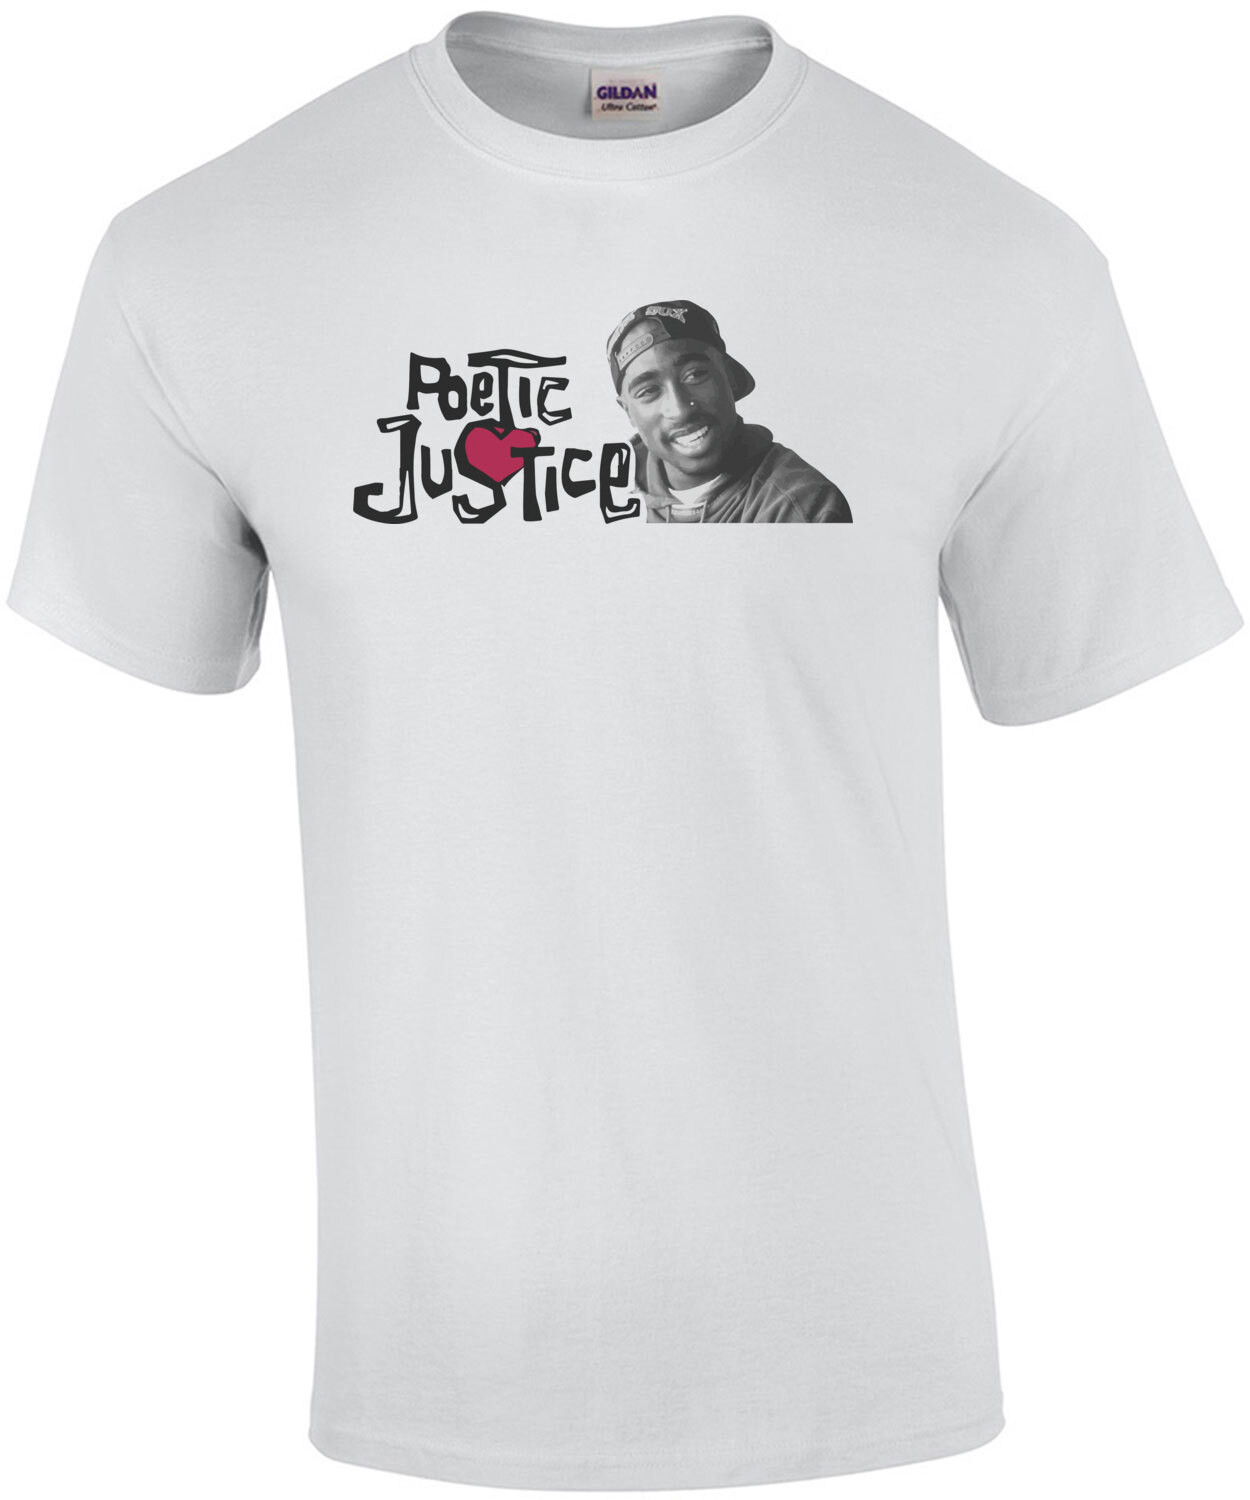 Poetic Justice - 90's T-Shirt